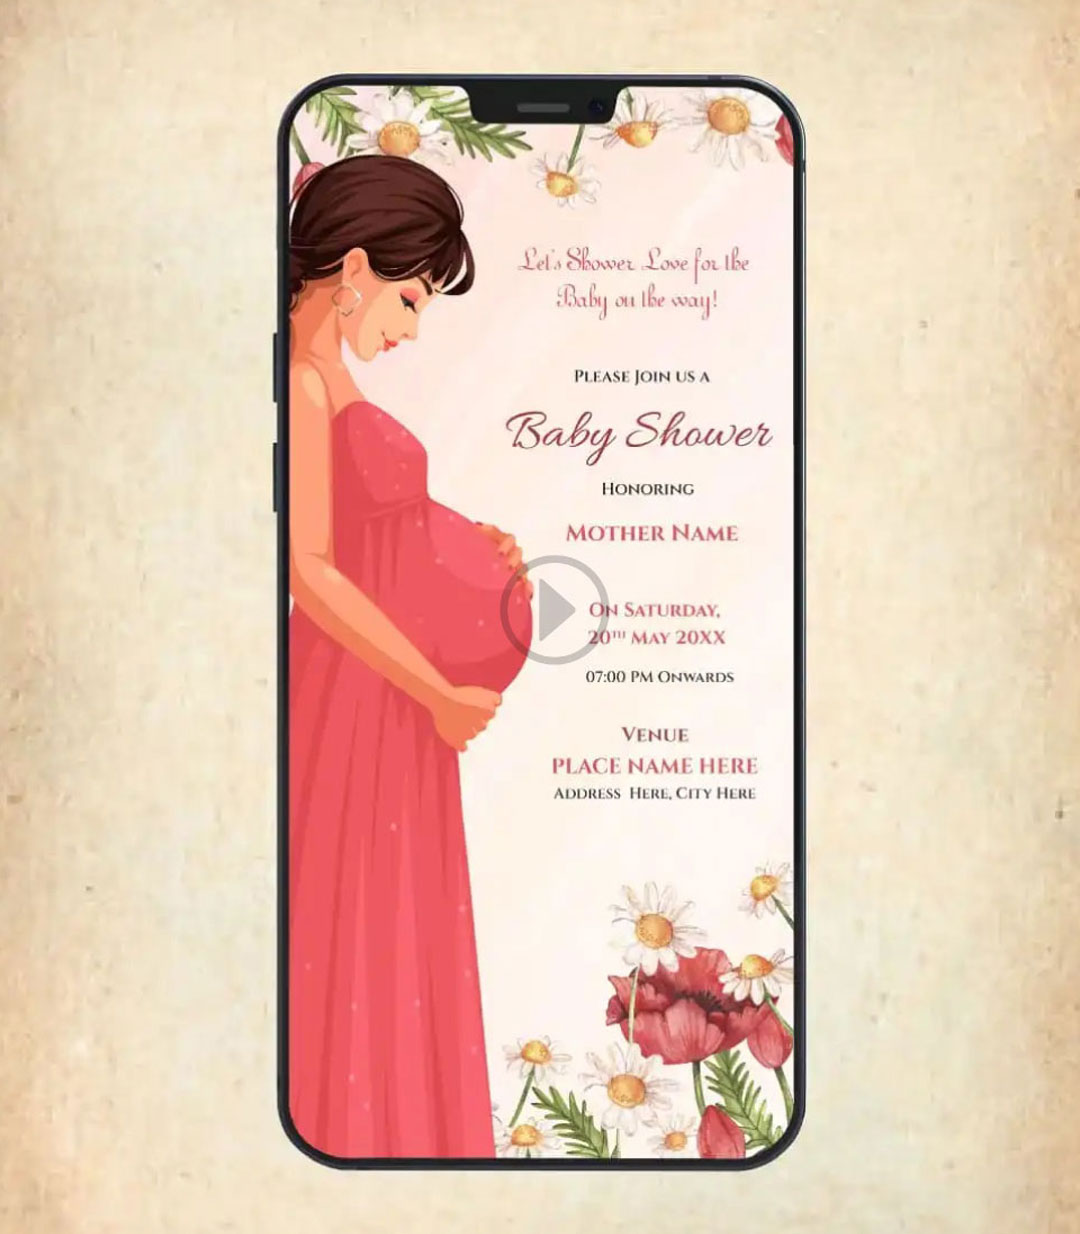 Baby Shower Invitation Video - Animated Baby Shower Invitation Video